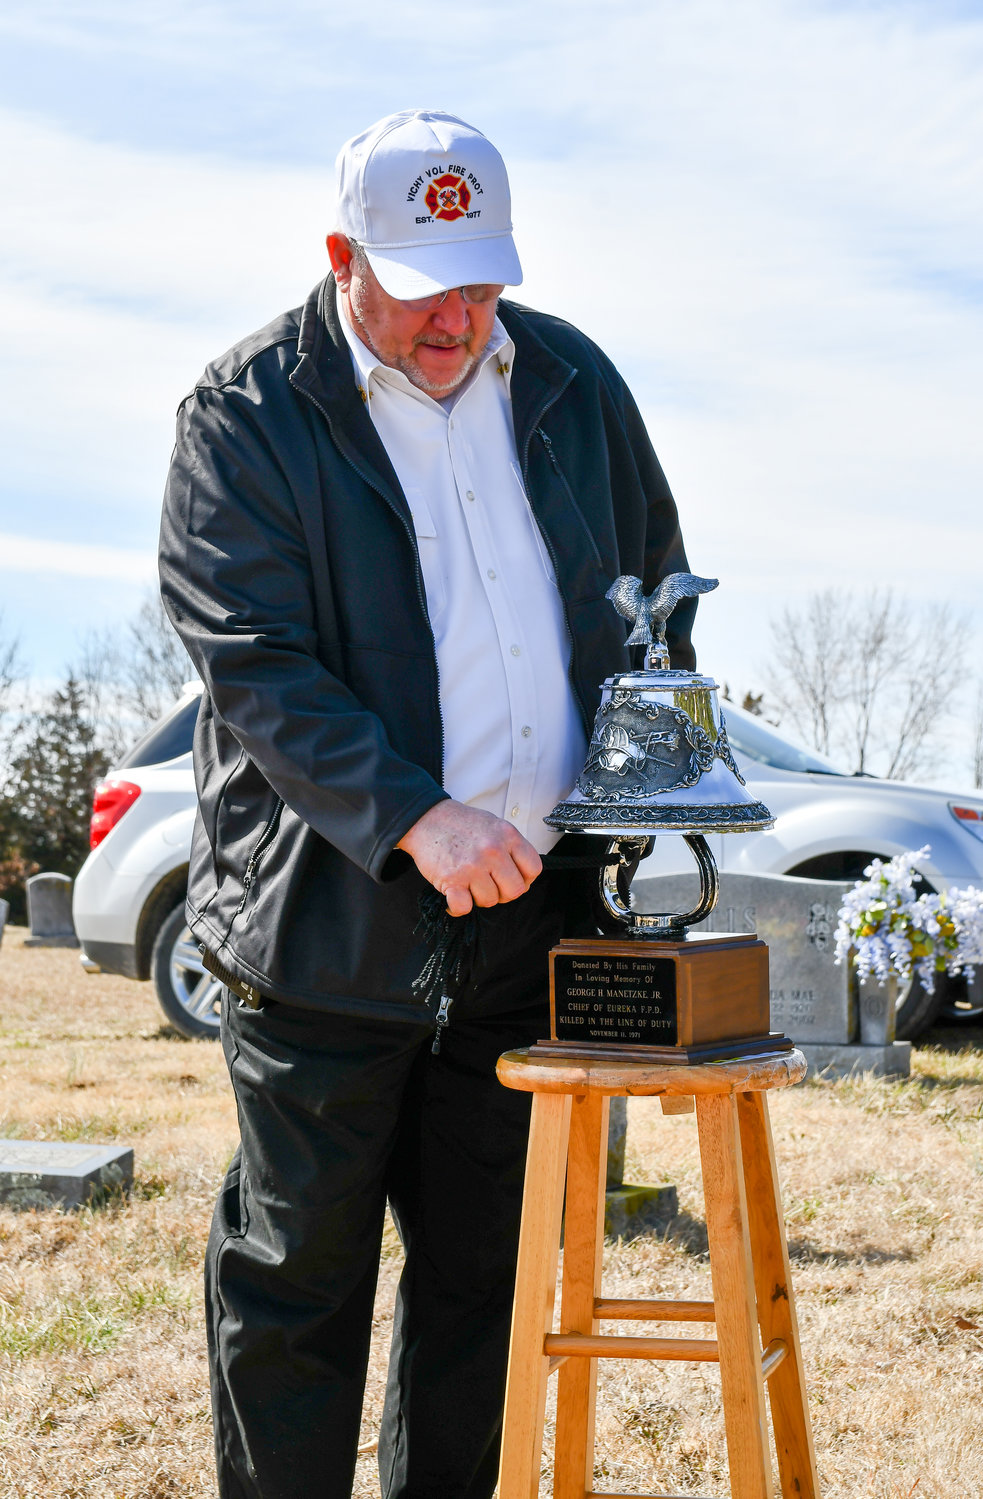 A bell ceremony was performed at the grave site with the three rings of the bell to signify the start of the shift and three rings of the bell to signify the alarm was completed. 